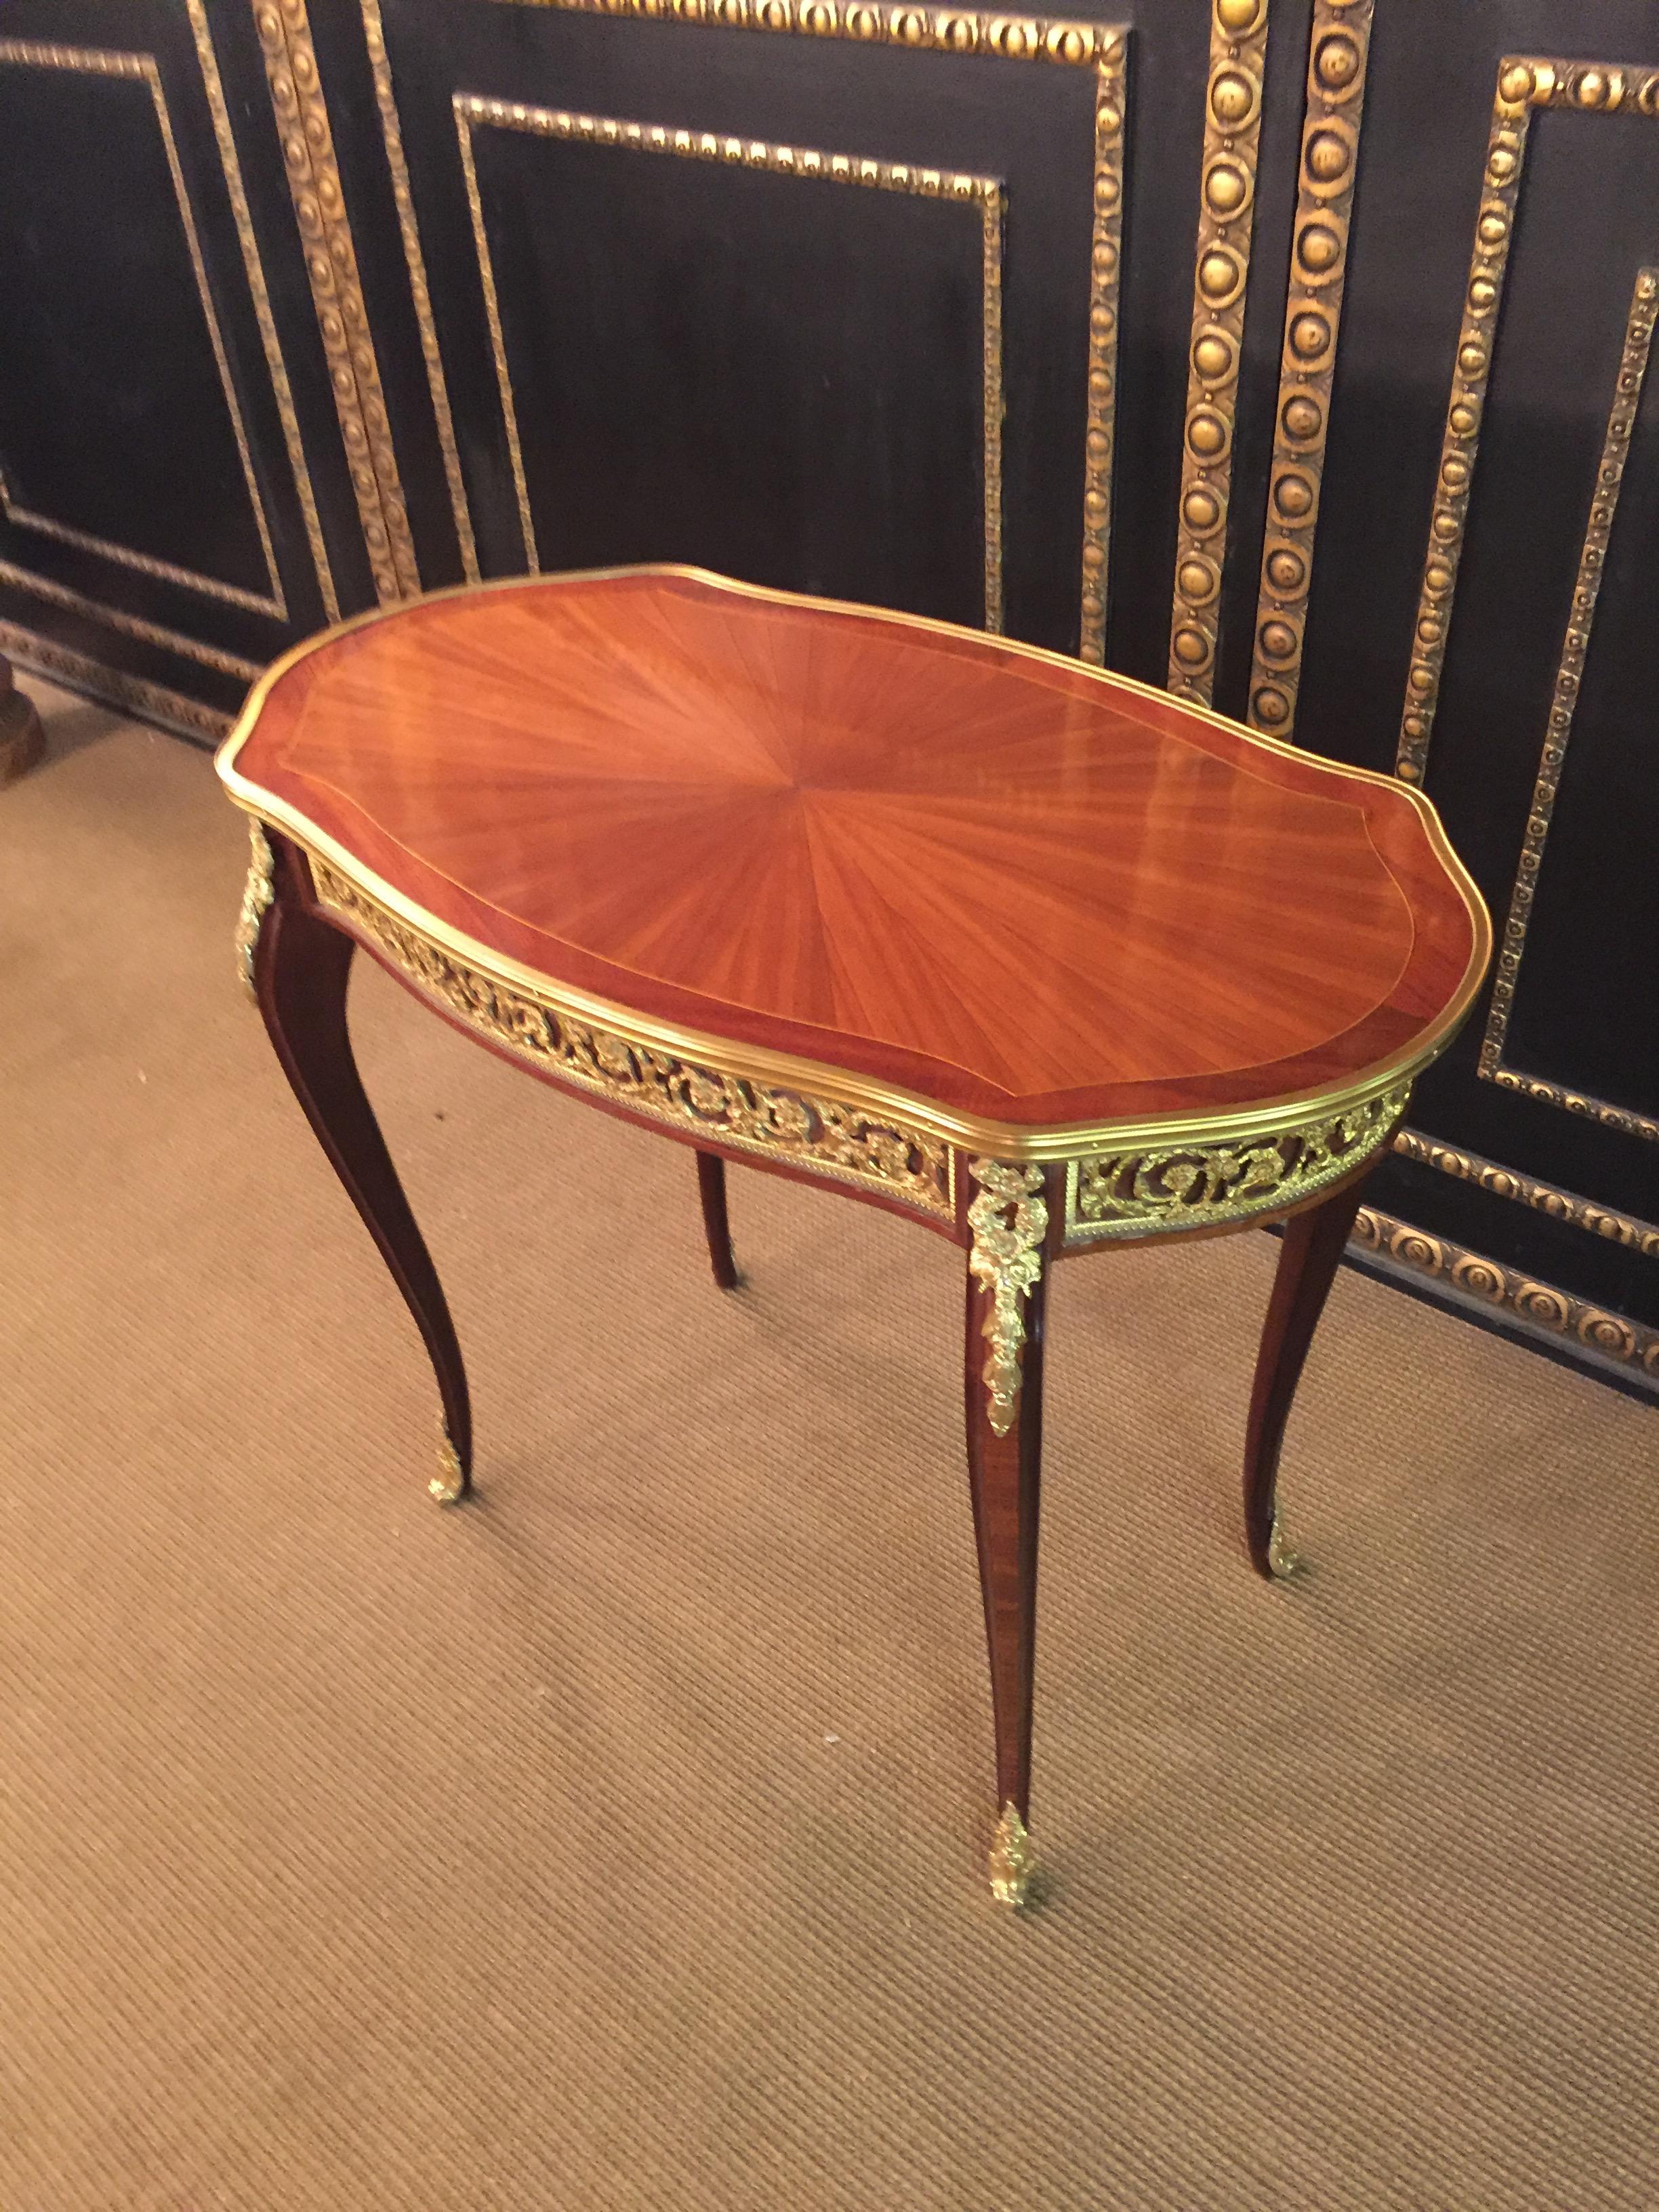 20th Century Unique French Salon Table in Transition Style, Rosewood Veneer on Beech